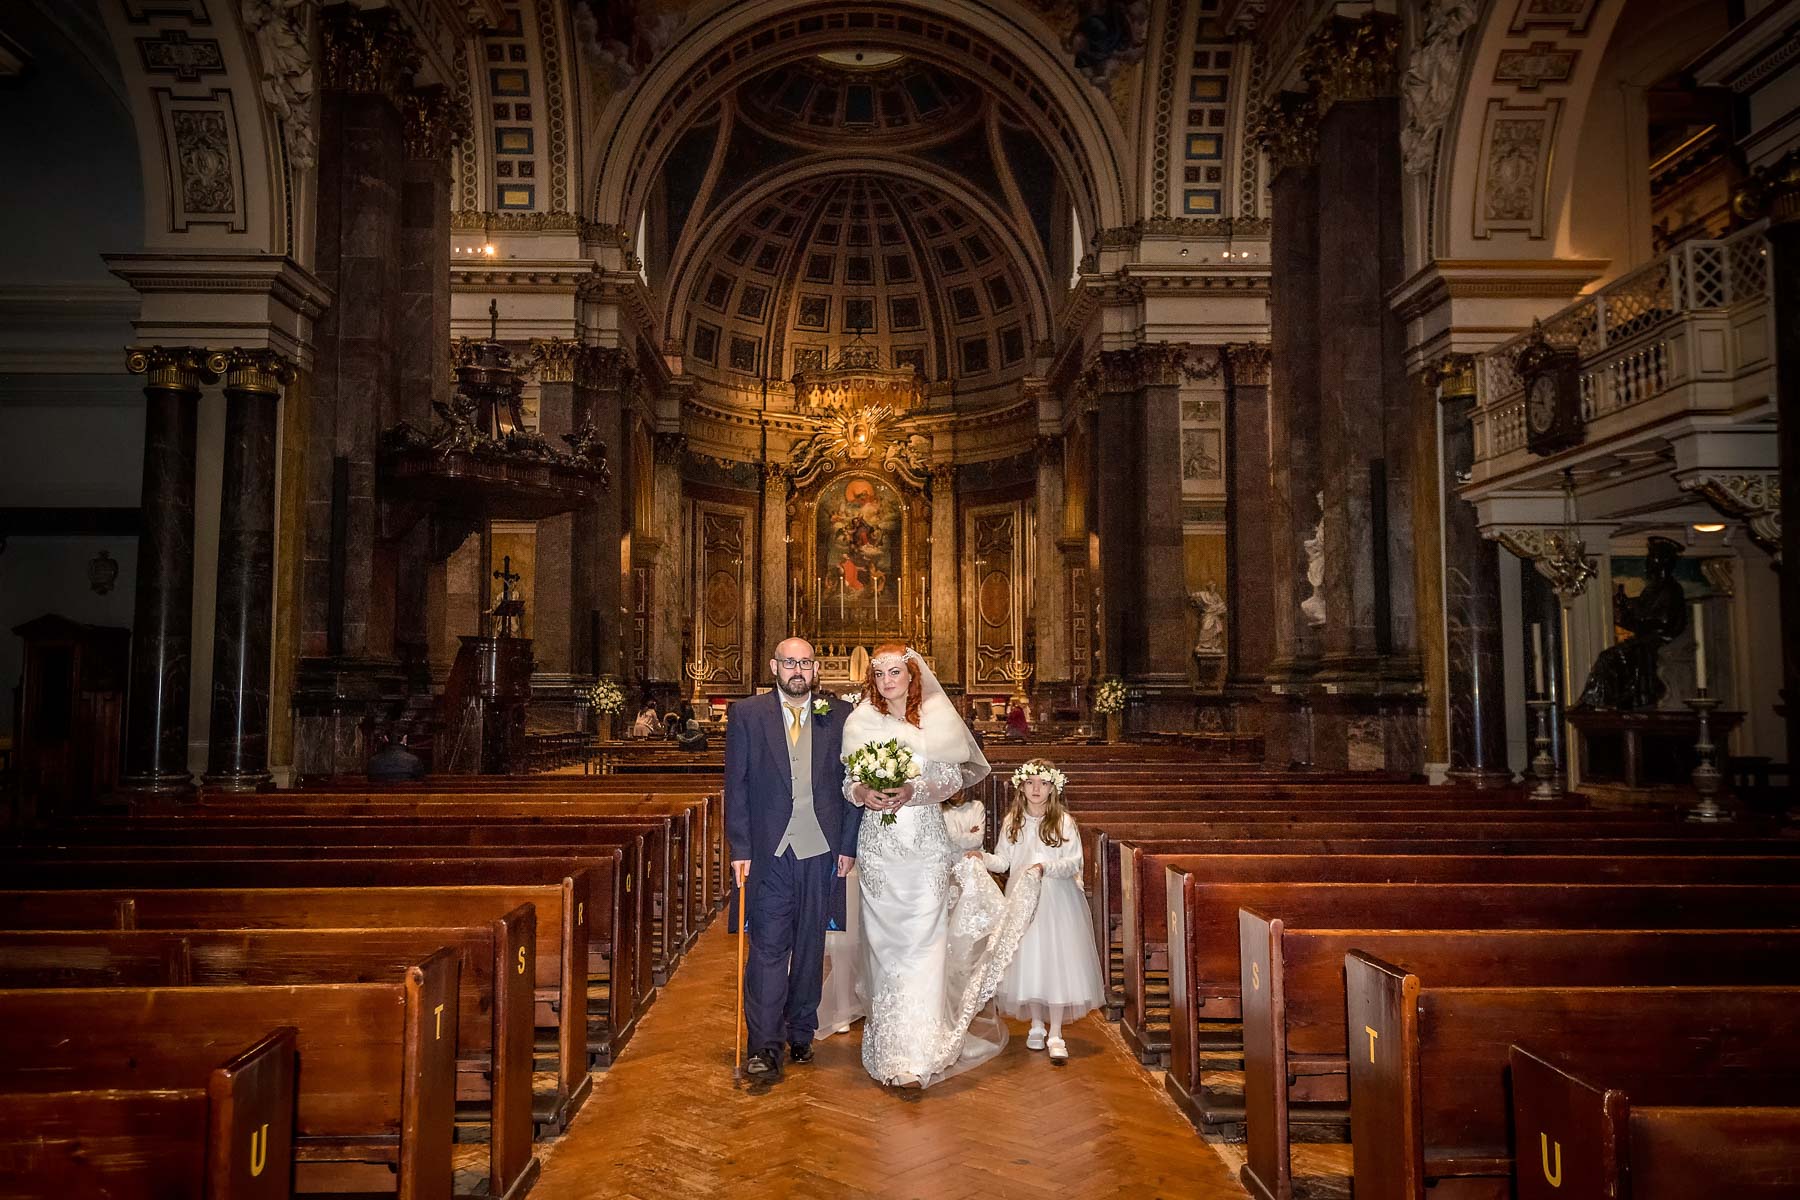 The newlyweds and their bridesmaids walk back down the aisle after their Brompton Oratory wedding ceremony